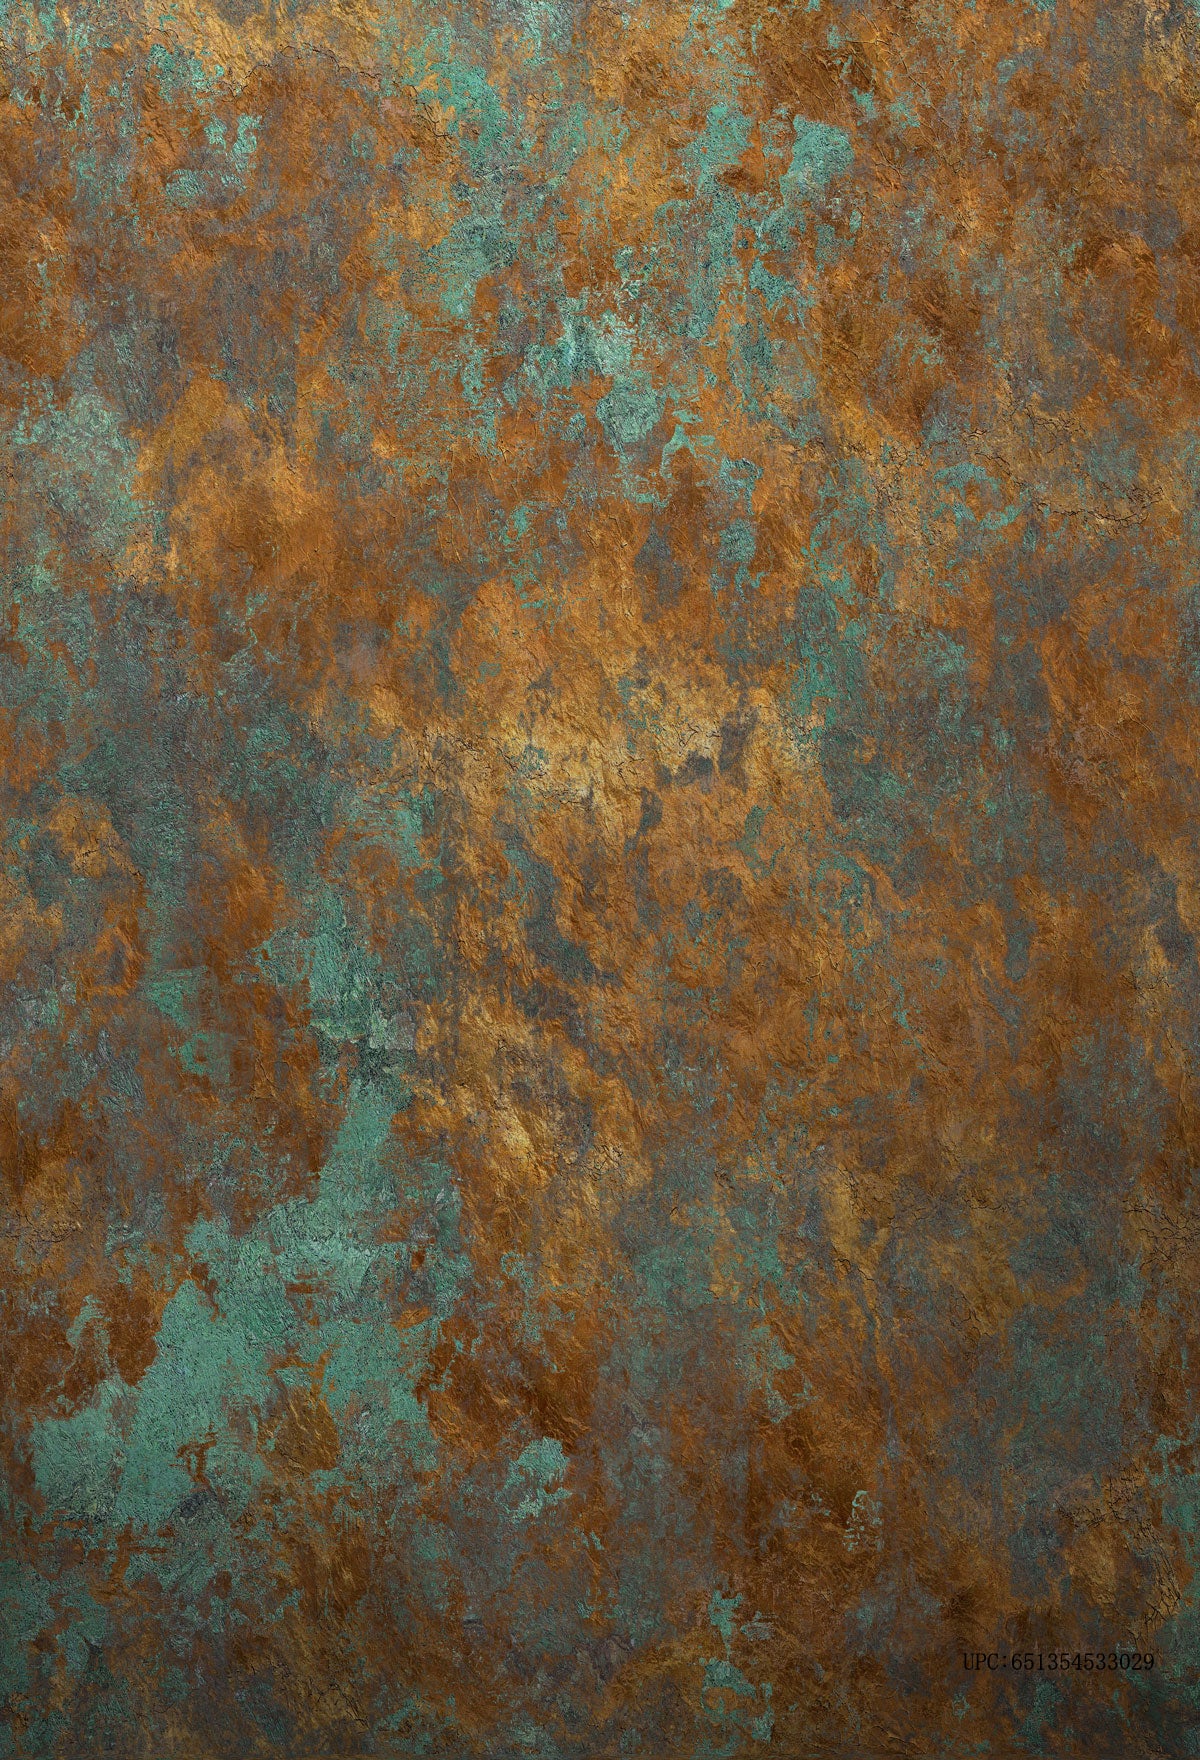 Kate Abstract Old Rusty Texture Background Microfiber Photography Backgrounds Portrait Backdrop for Photo Studio